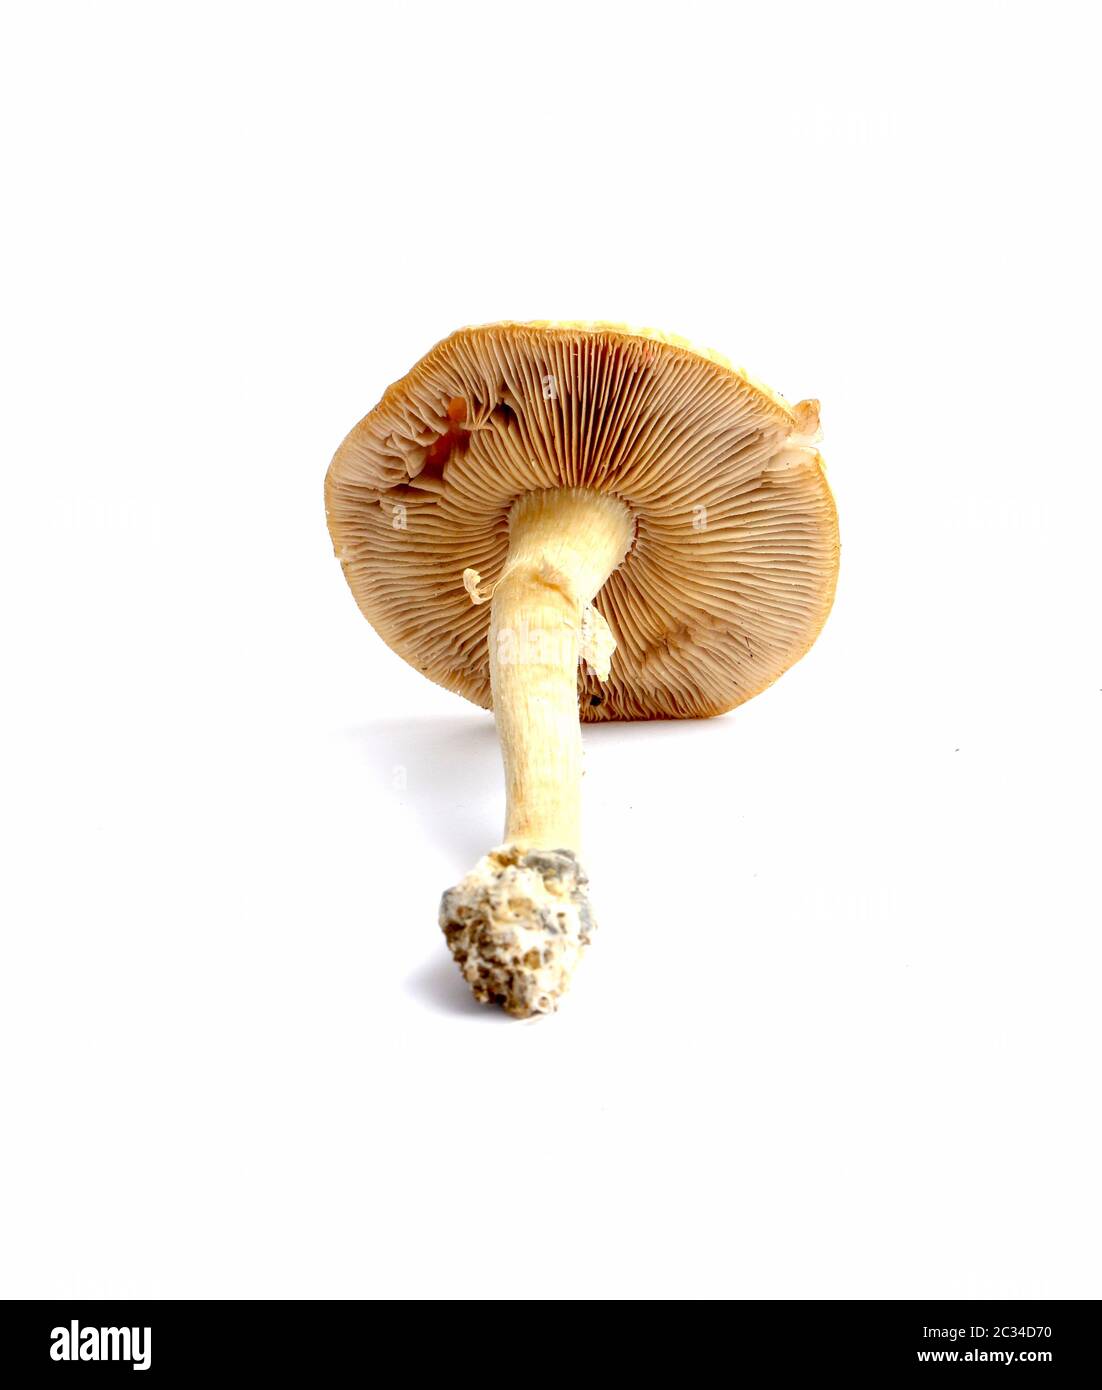 picture of a fresh harvested mushroom Stock Photo